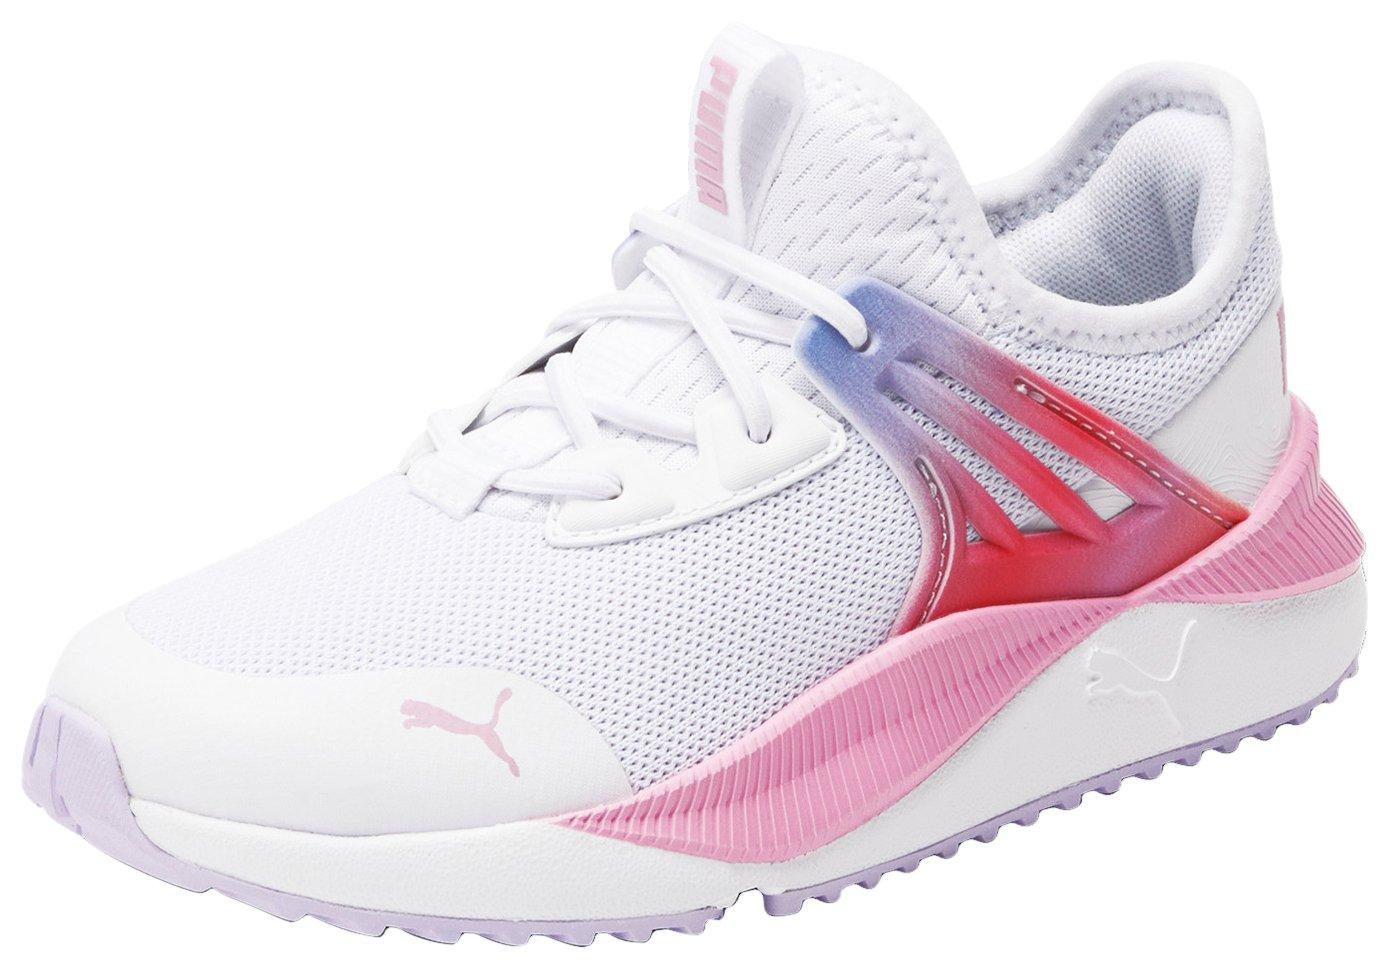 Puma Girls Pacer Future Sunset Sky Athletic Shoes